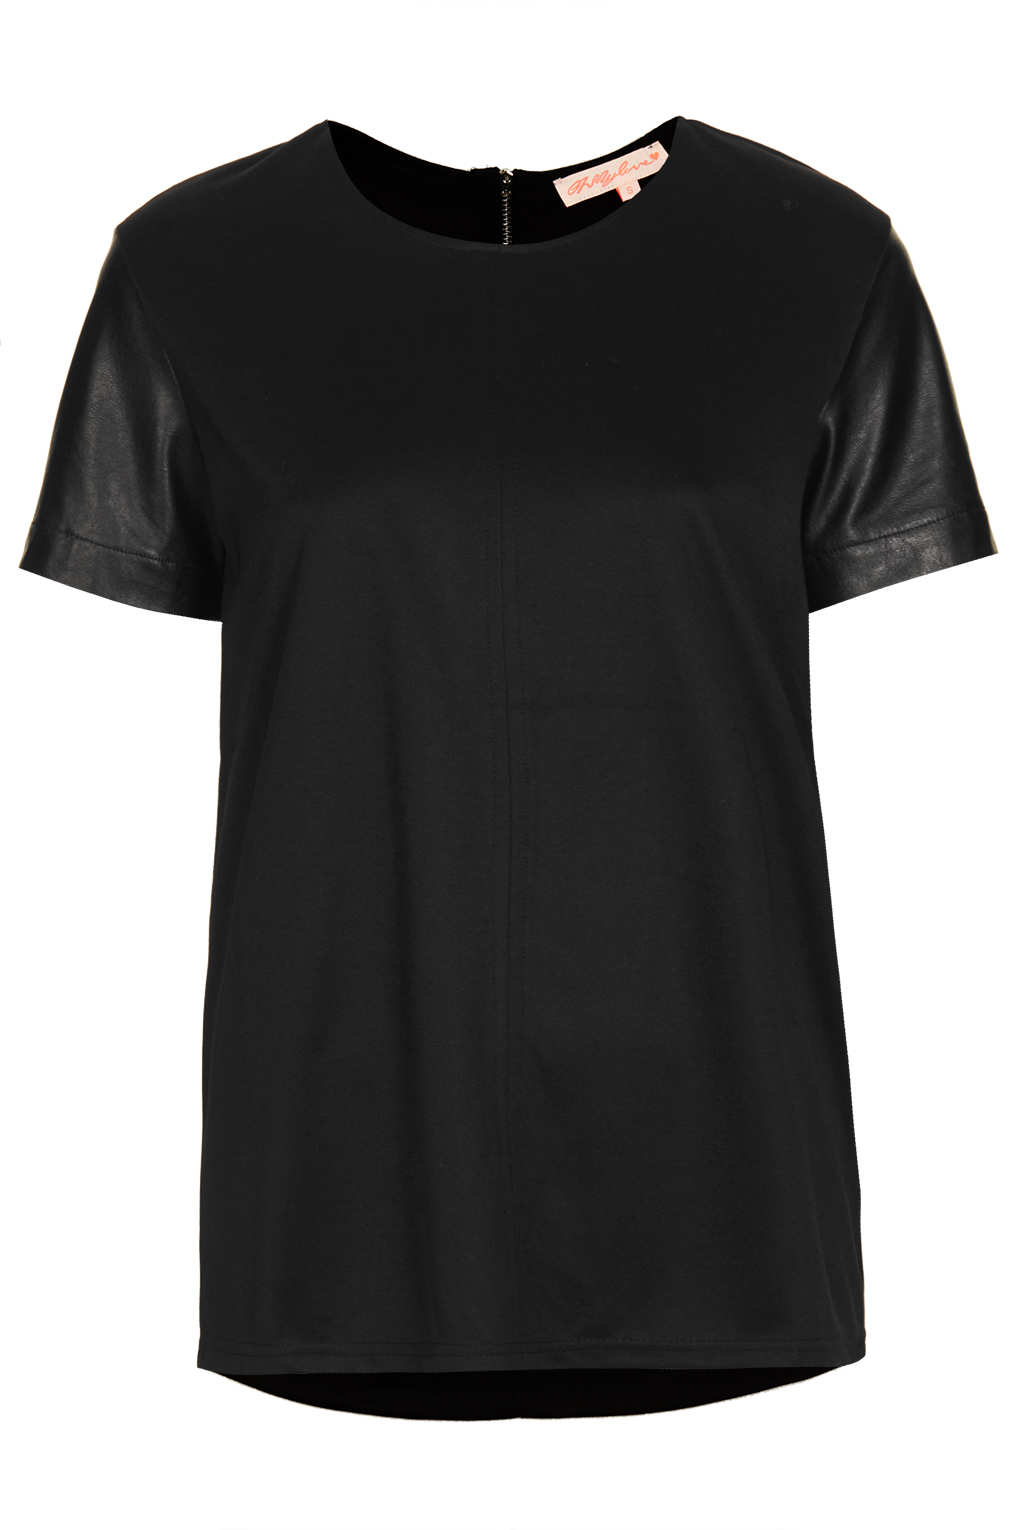 Lyst - Topshop Boxy Tee with Pu Sleeves in Black